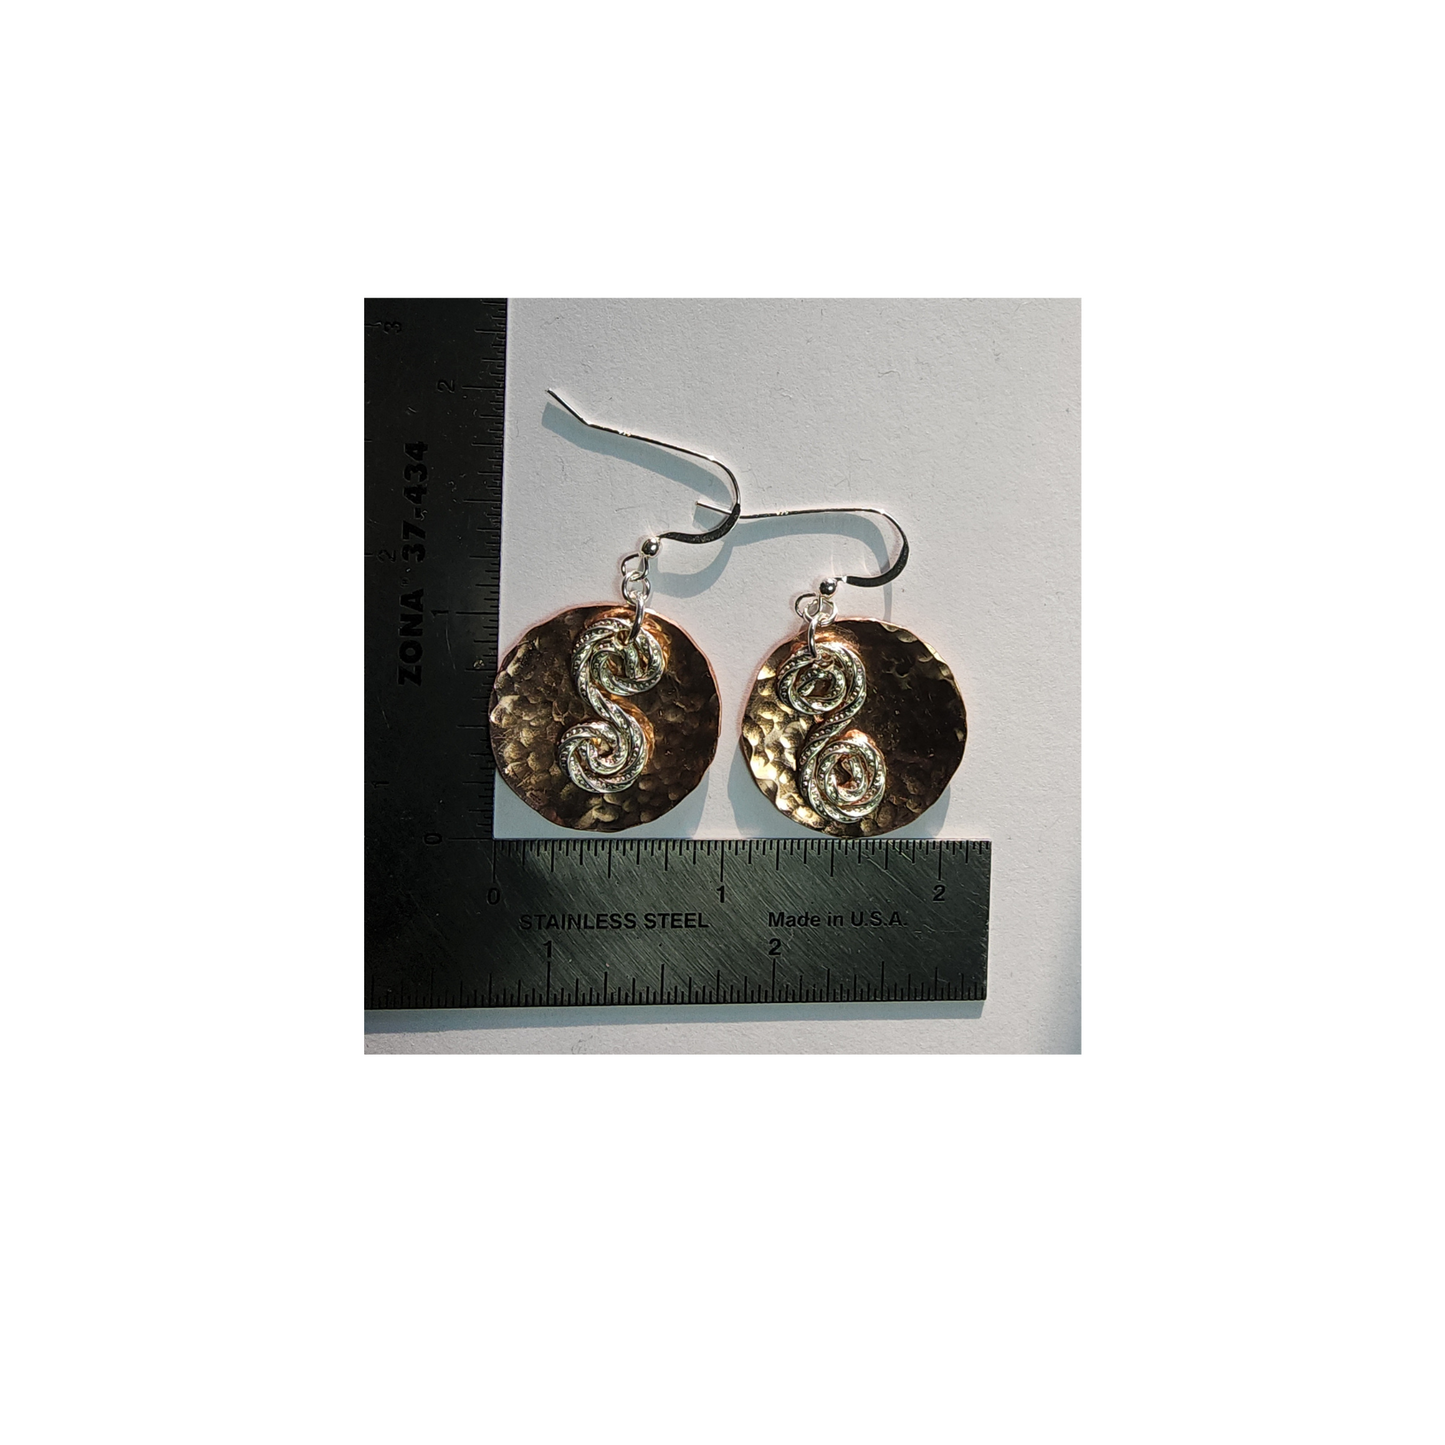 Womans Earrings Handmade Silver and Copper Jewelry